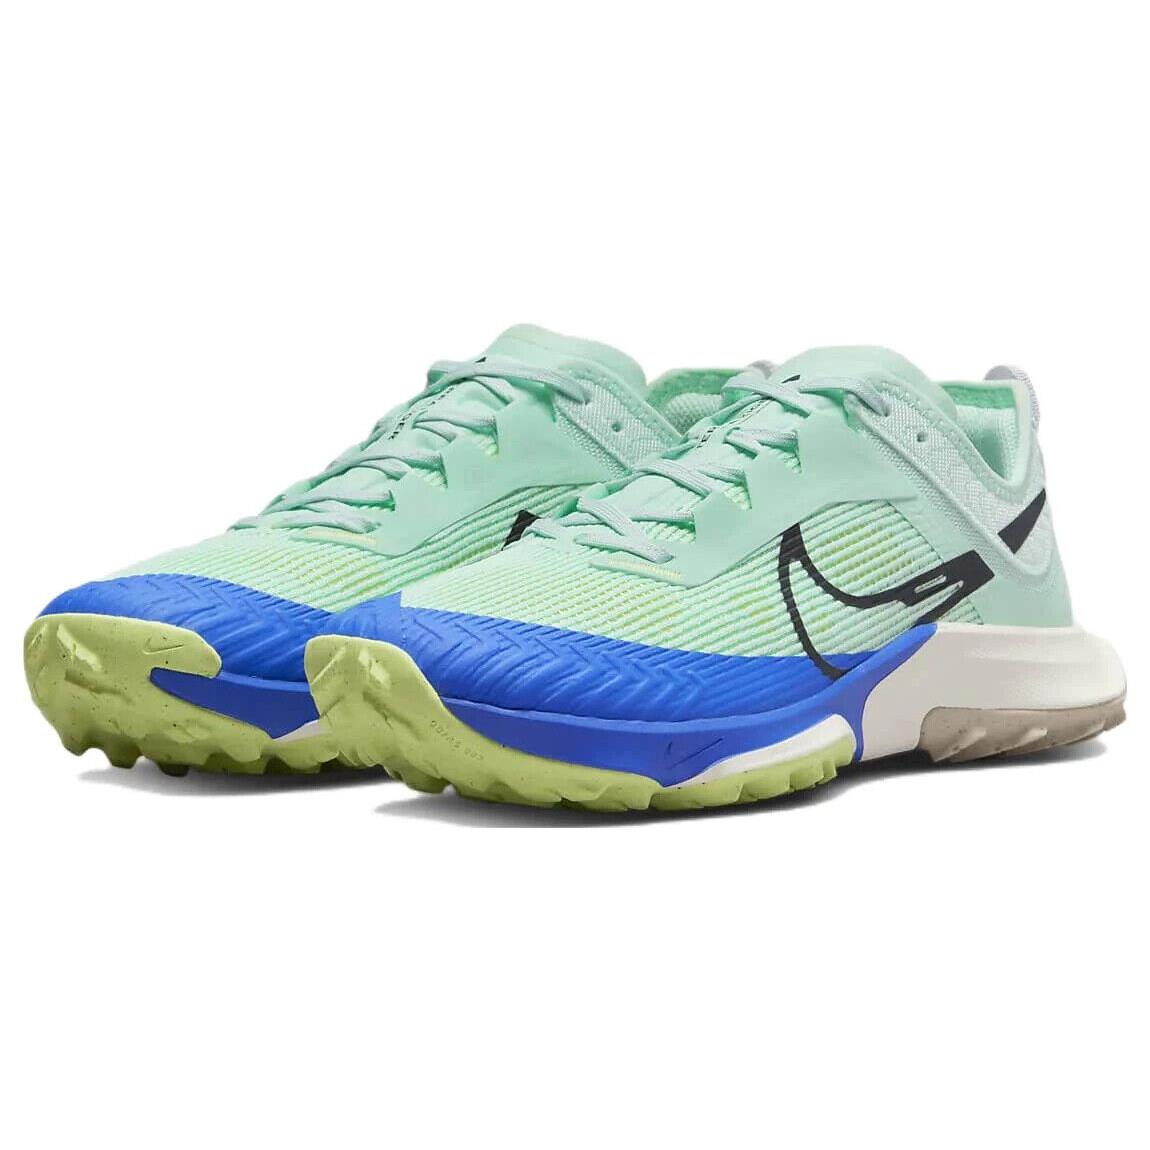 Nike Air Zoom Terra Kiger 8 Womens Size 10 Sneaker Shoes DH0654 301 Mint Green